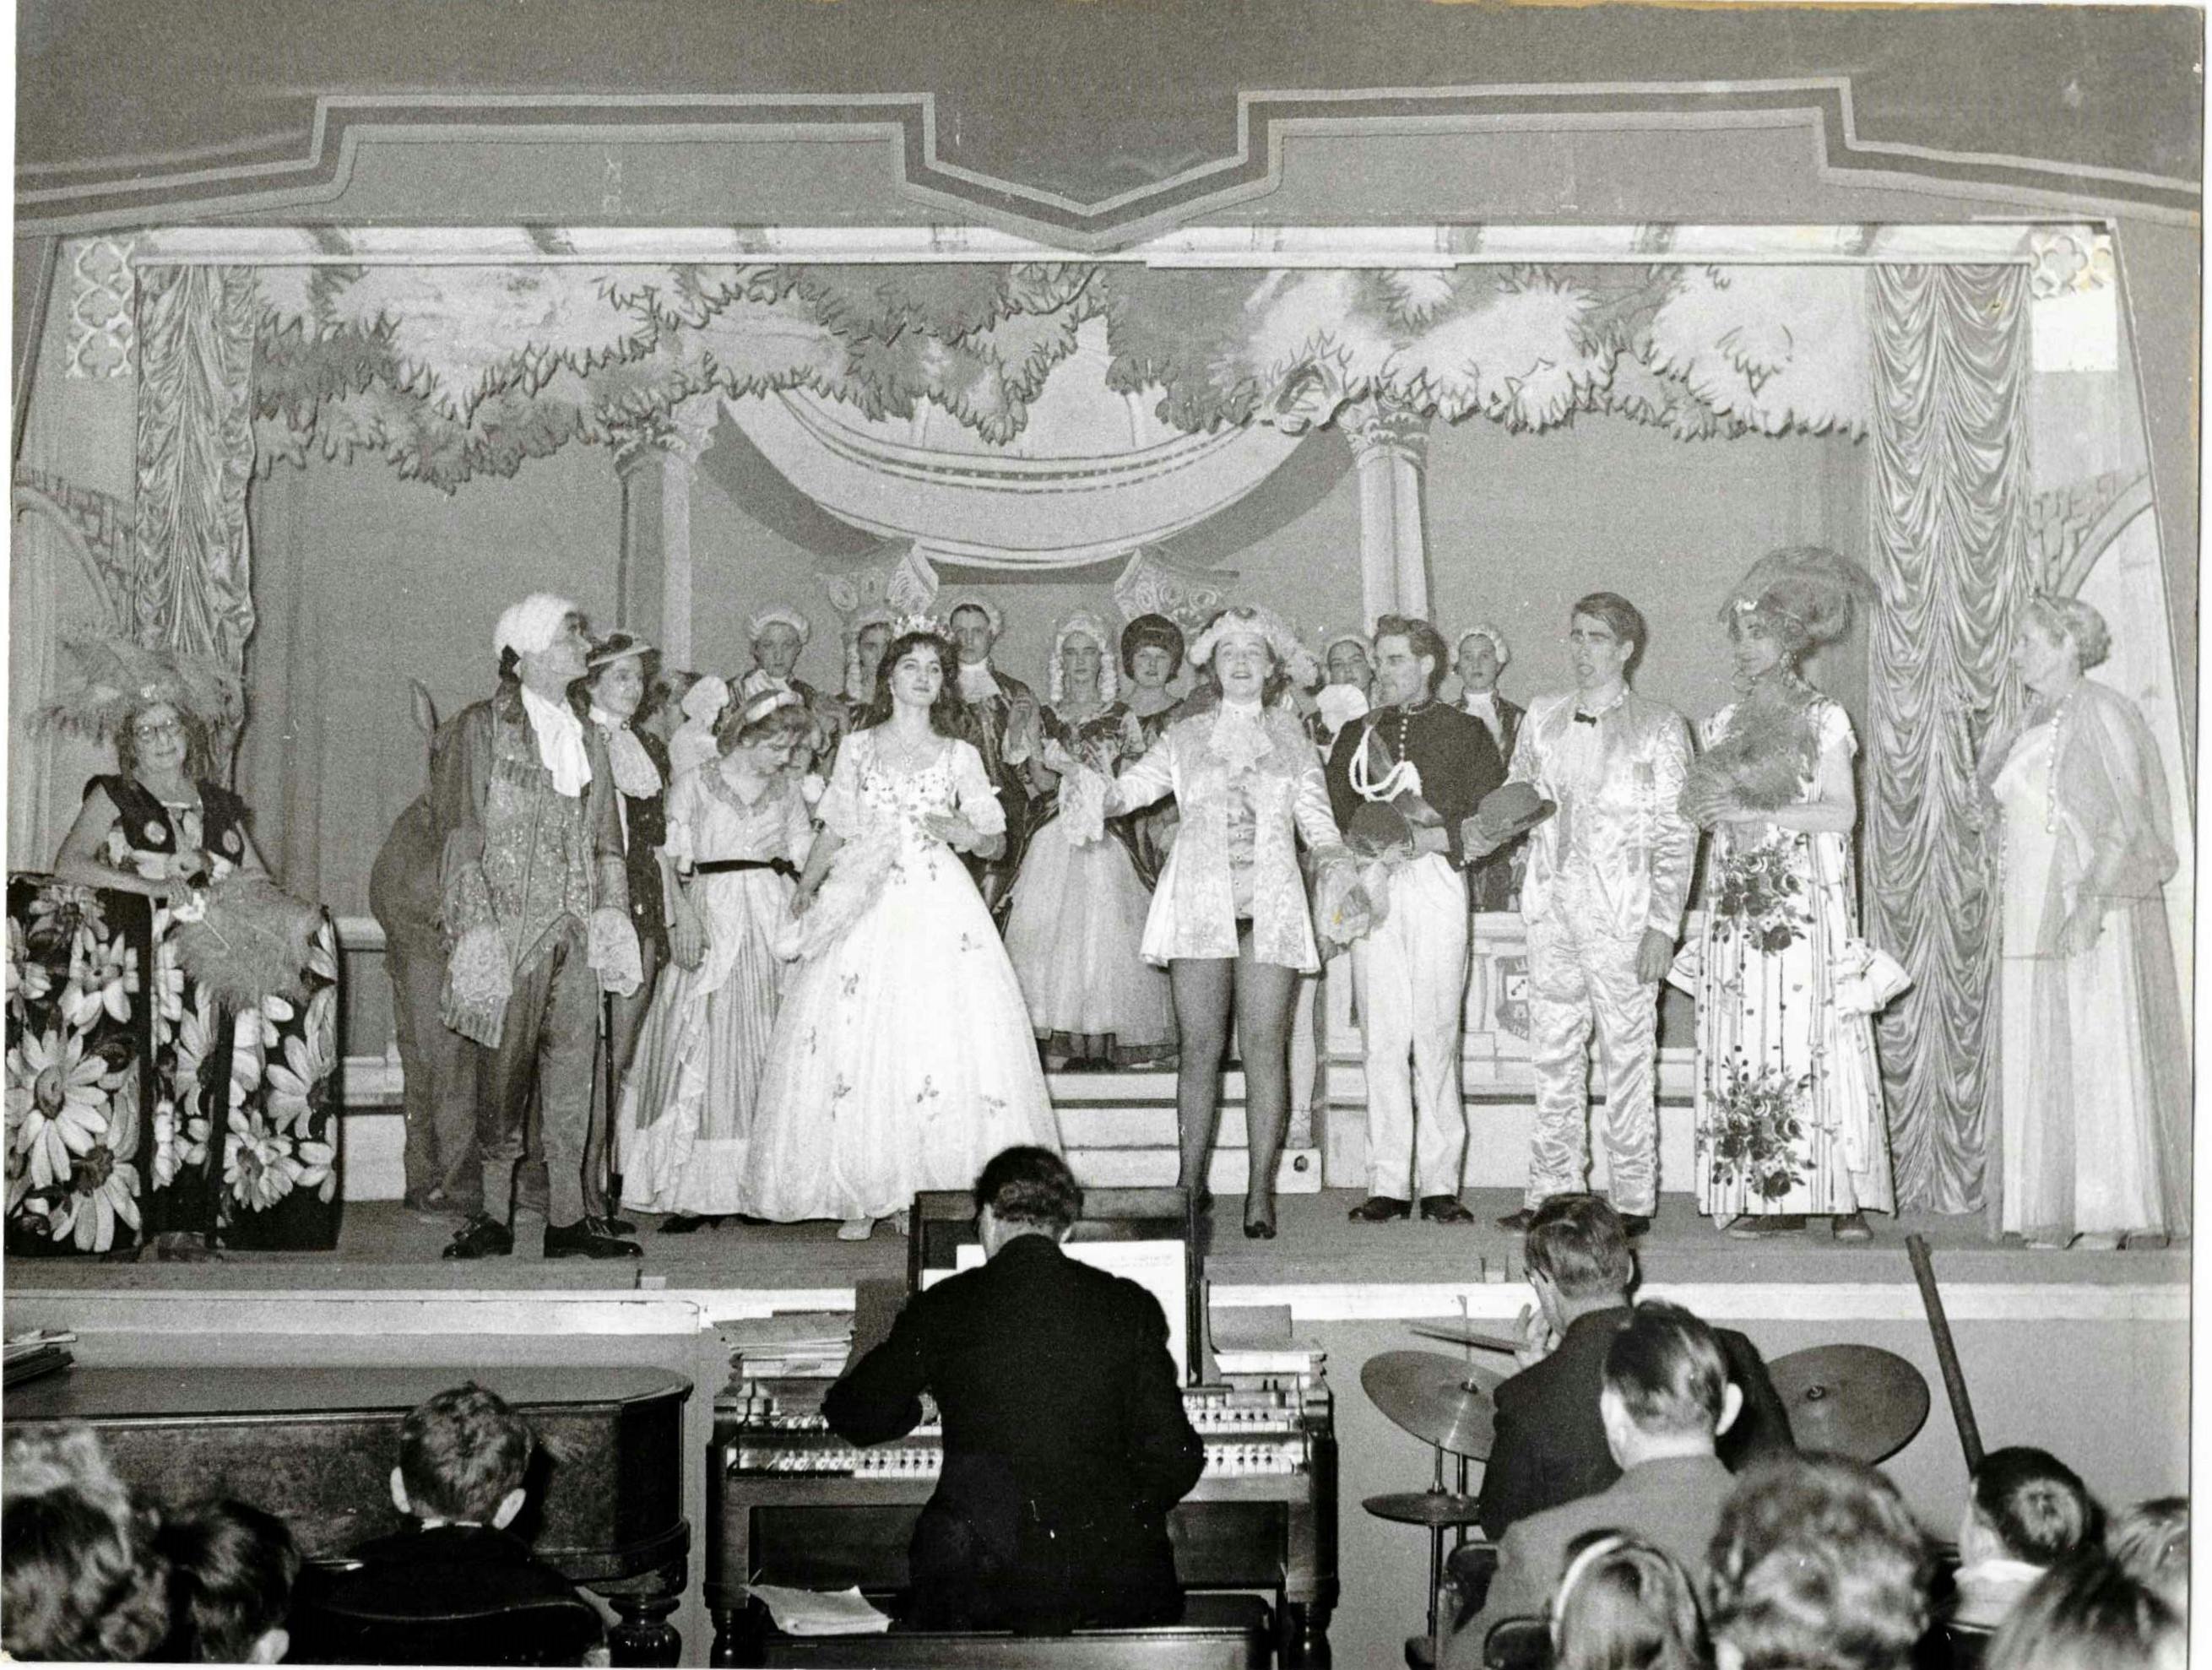 Image of the final curtain call for the production of Cinderella at the Selsey Pavilion, 1953